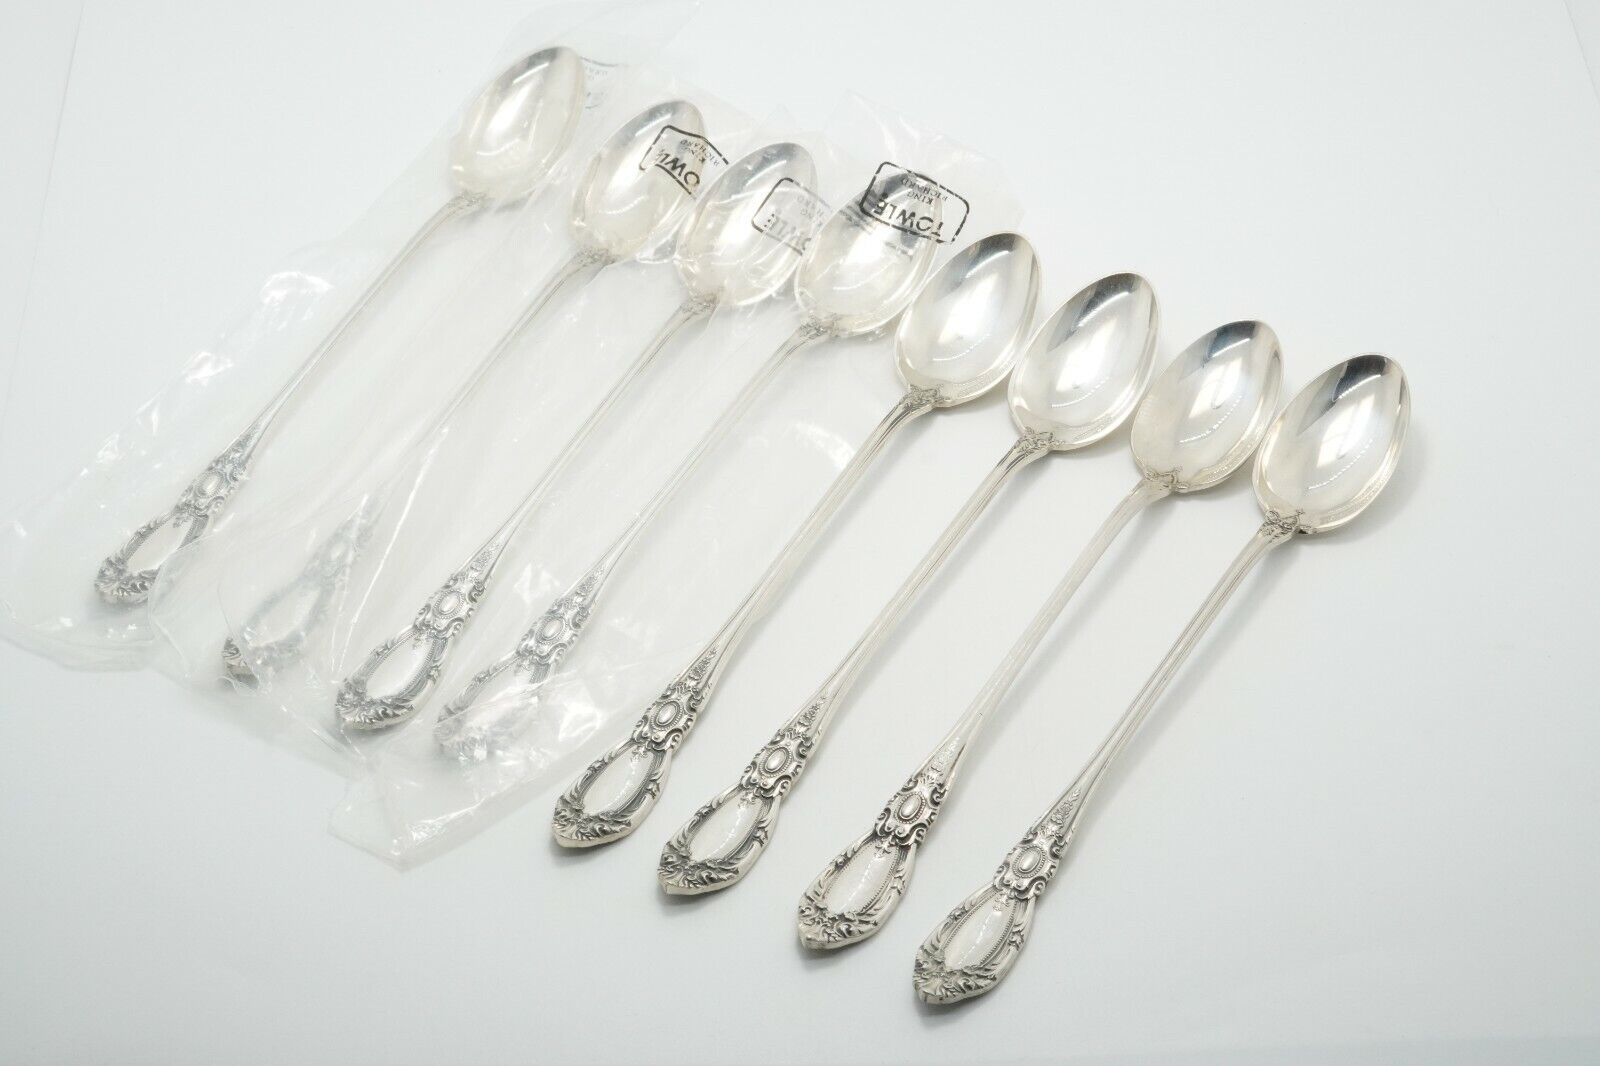 Towle King Richard Sterling Silver 8 Iced Tea Spoons No Monogram, 8 1/4"